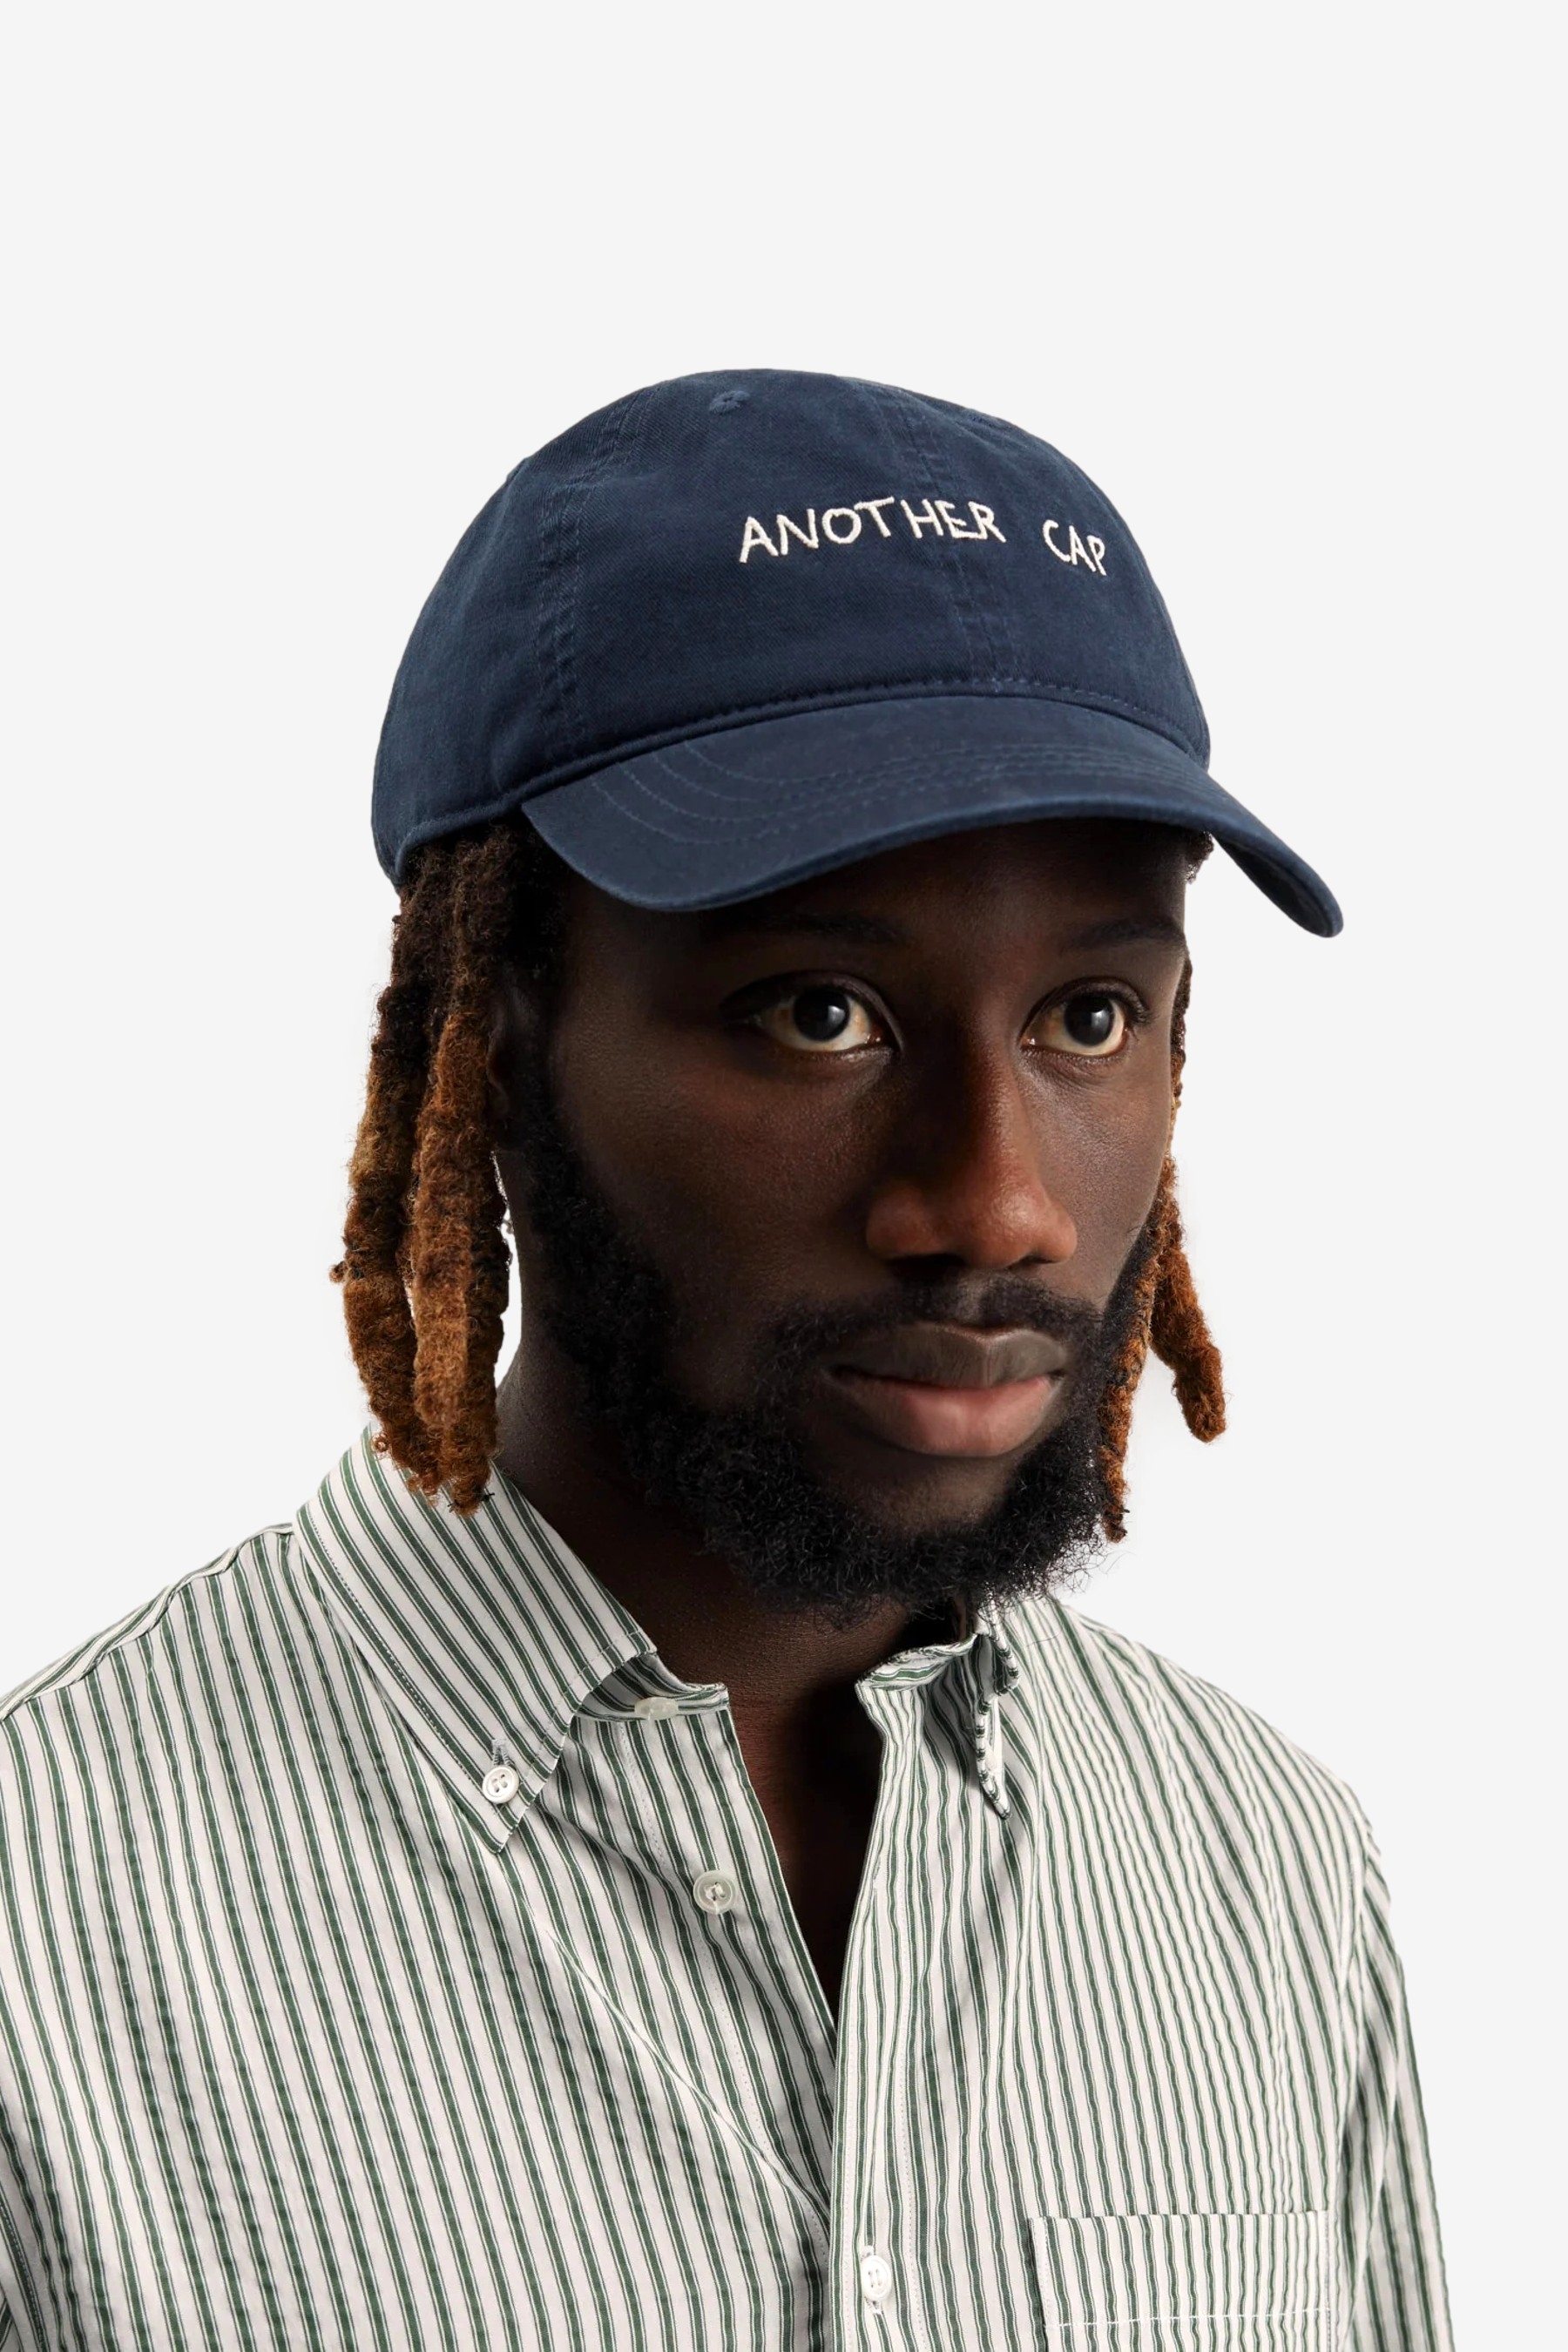 Another Cap 1.0 in Navy - Another Aspect | Afura Store